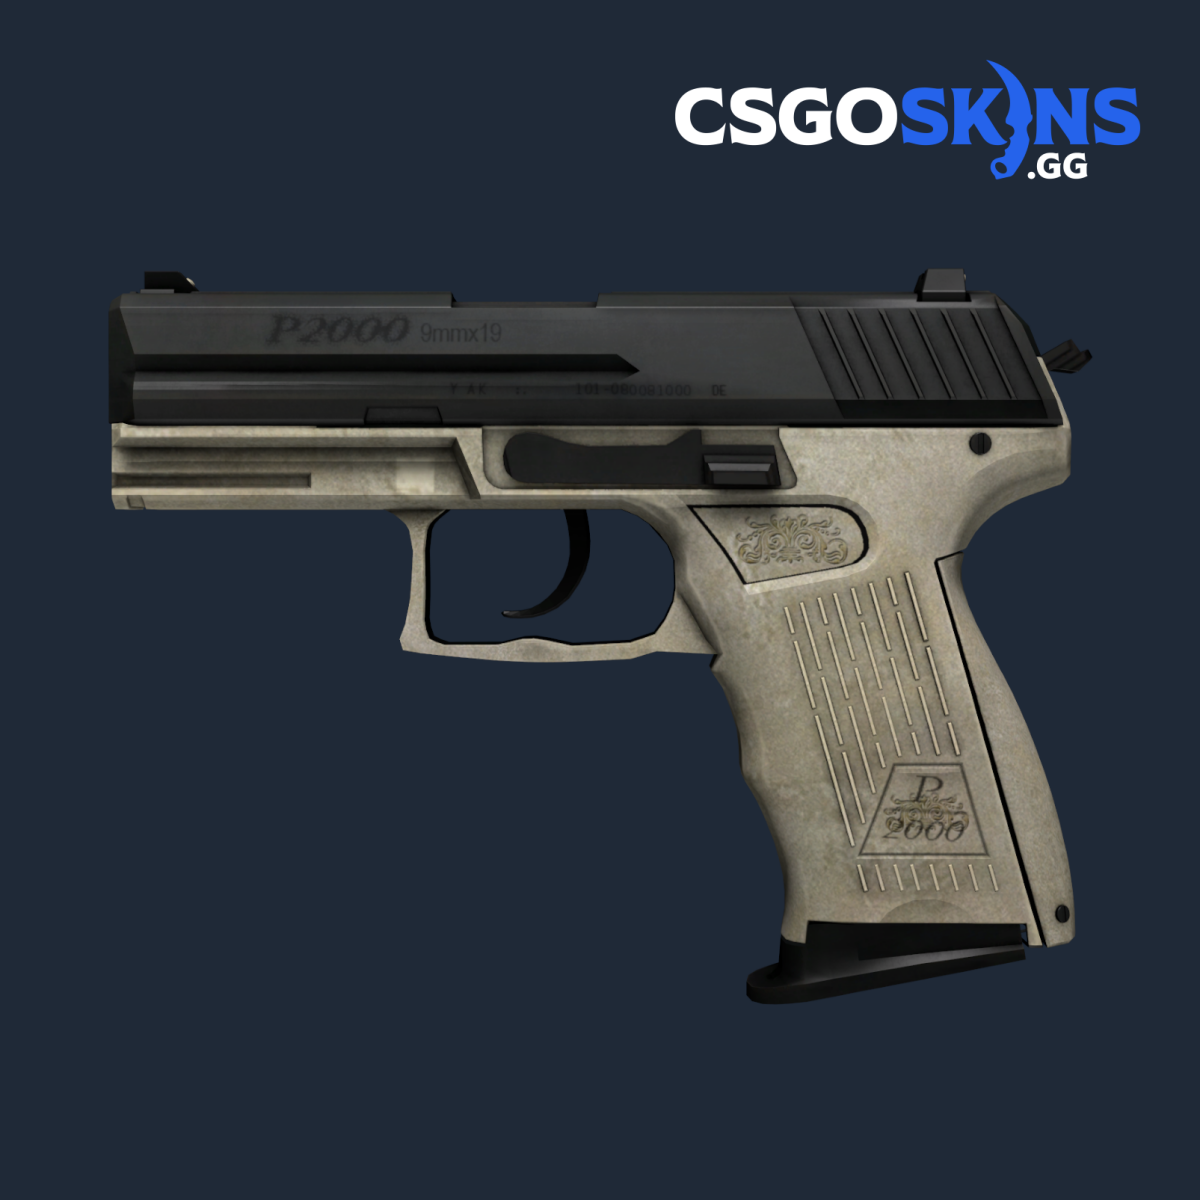 P2000 Ivory cs go skin download the new for windows